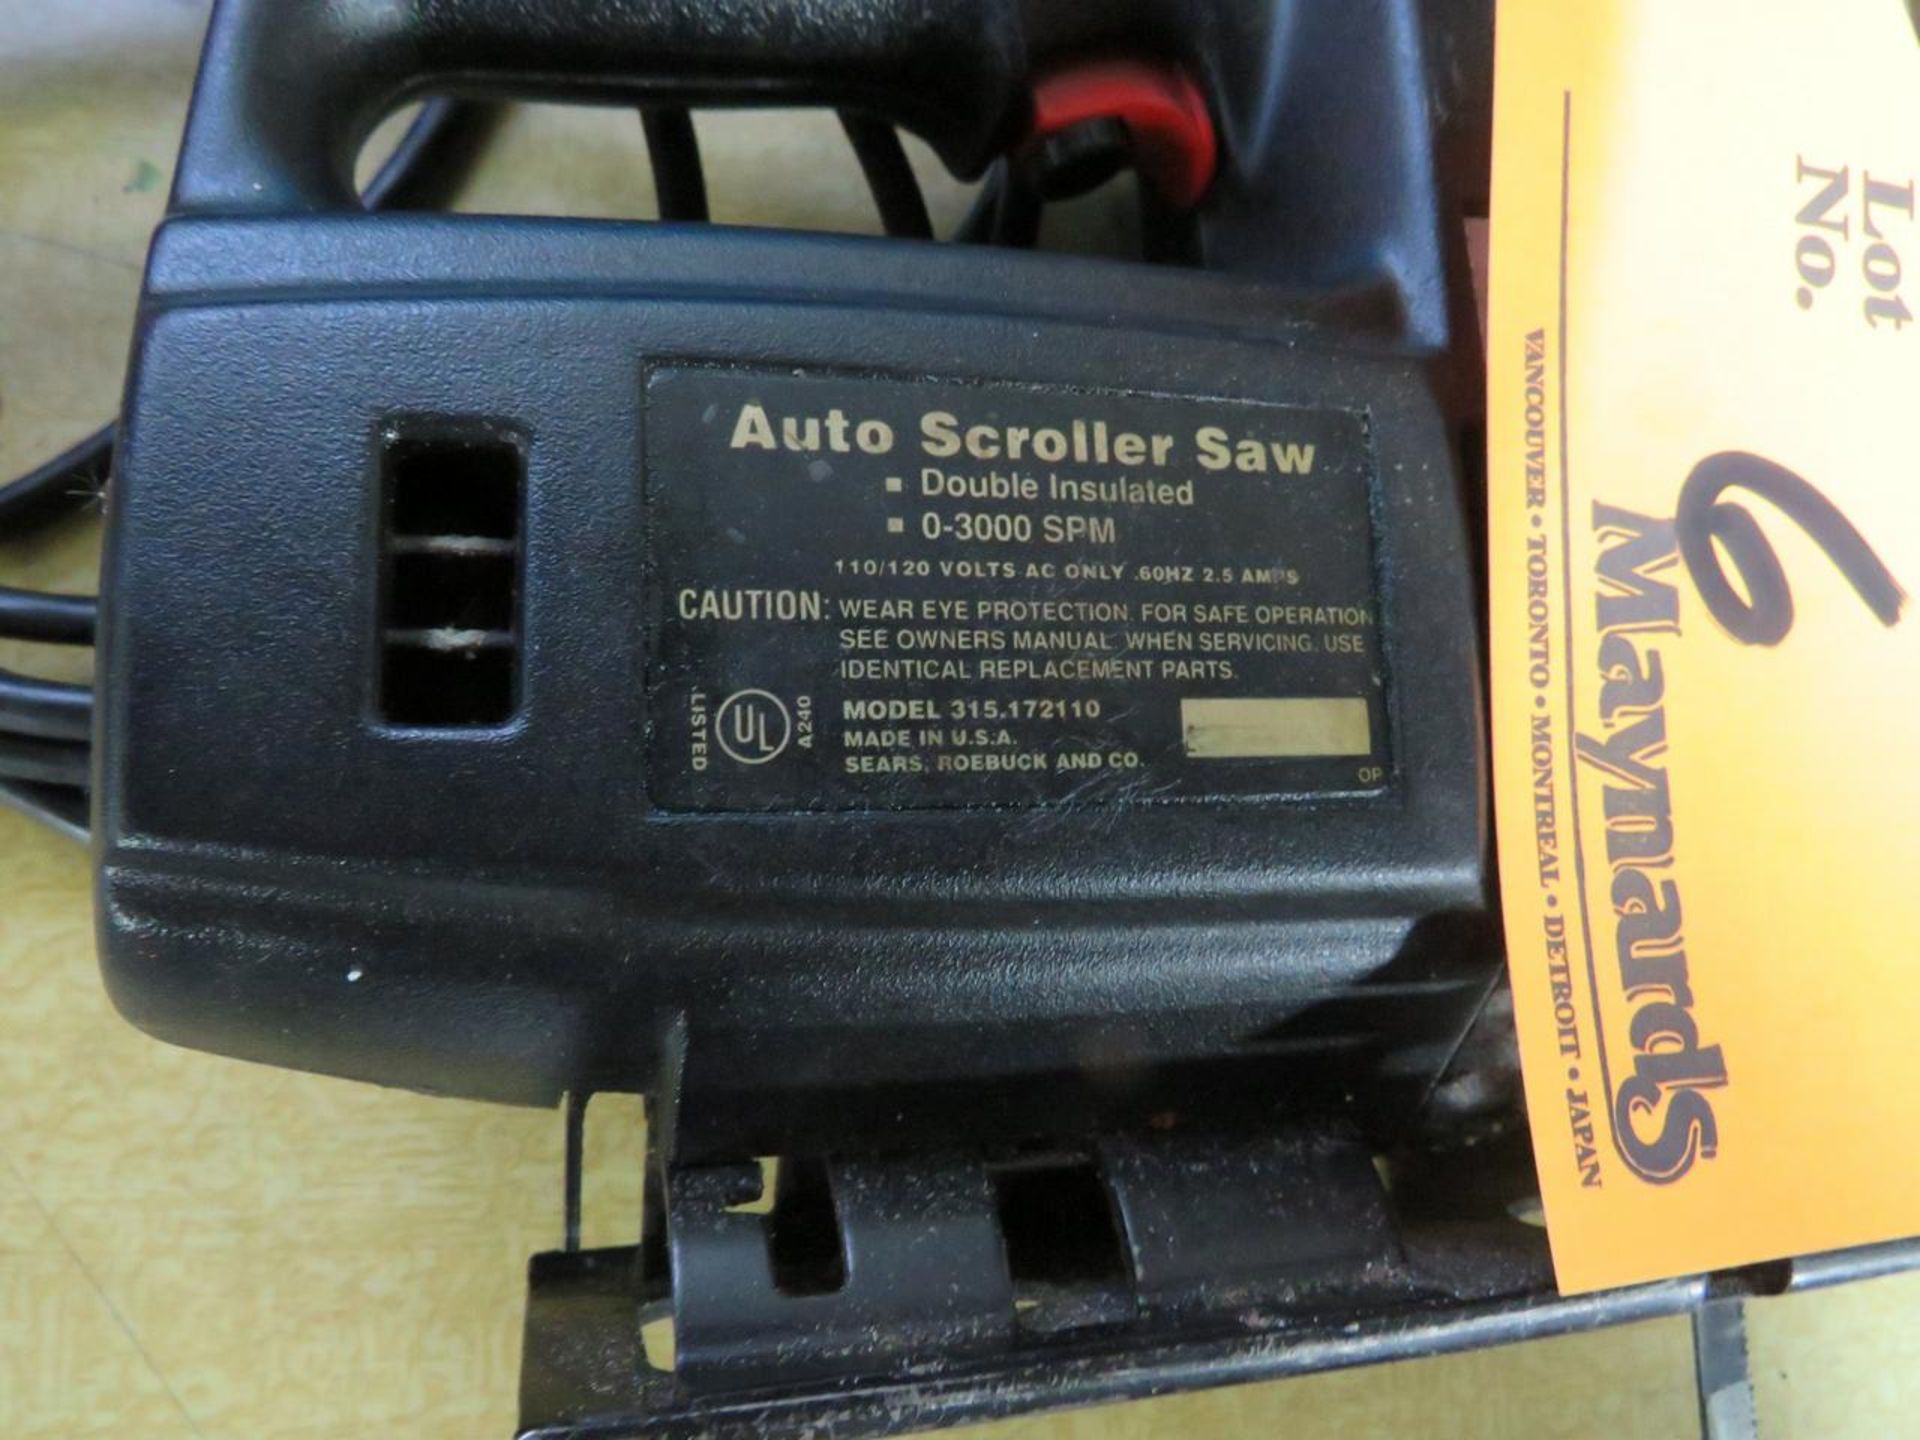 SEARS 315.17211 1/3 HP AUTO ELECTRIC SCROLLER SAW - Image 2 of 3